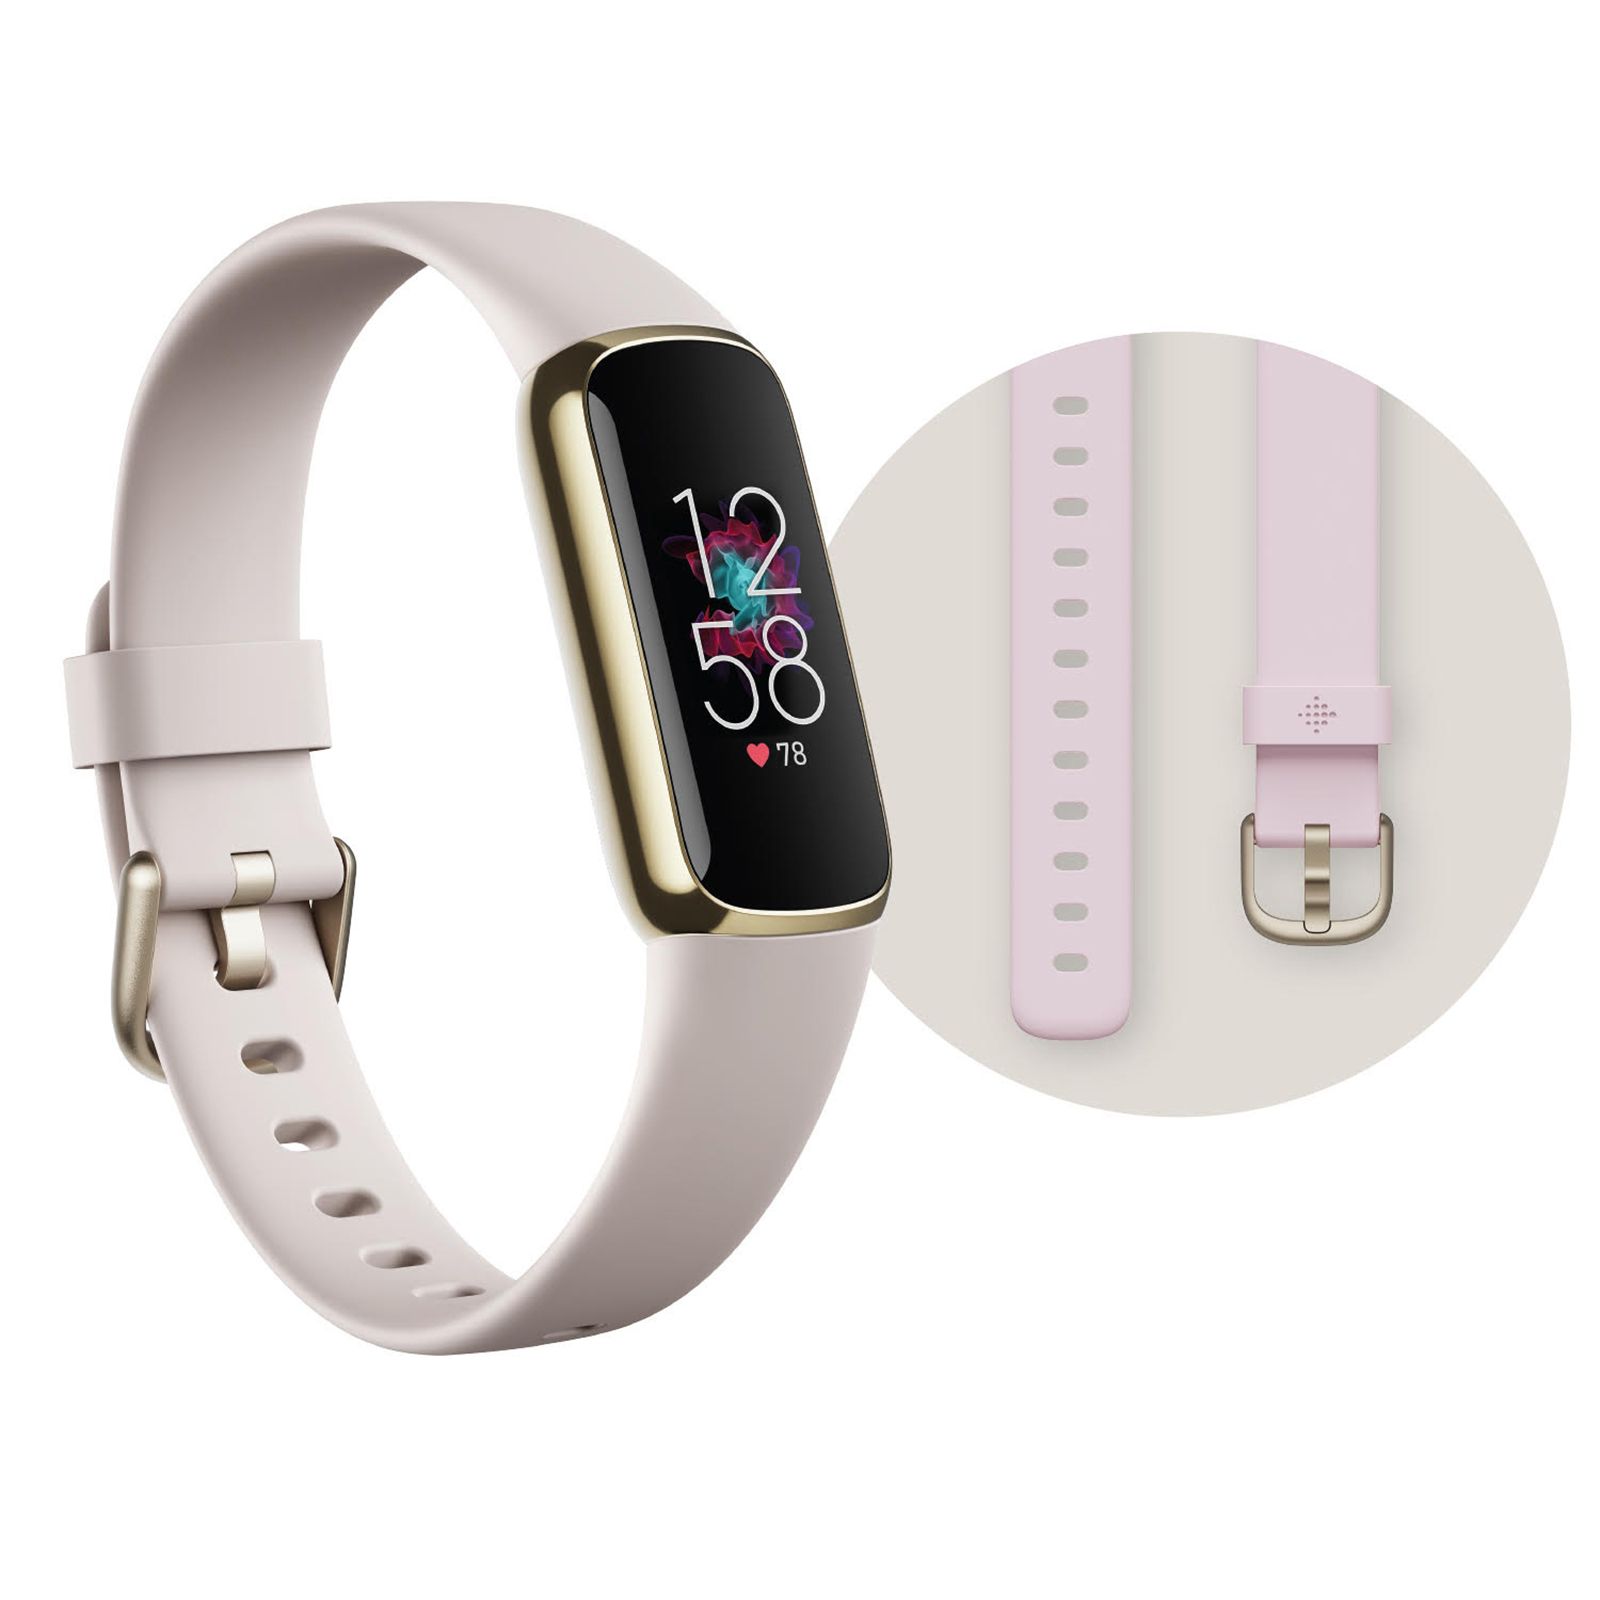  Fitbit Luxe-Fitness and Wellness-Tracker with Stress  Management, Sleep-Tracking and 24/7 Heart Rate, One Size S L Bands  Included, Lunar White/Soft Gold Stainless Steel, 1 Count : Sports & Outdoors